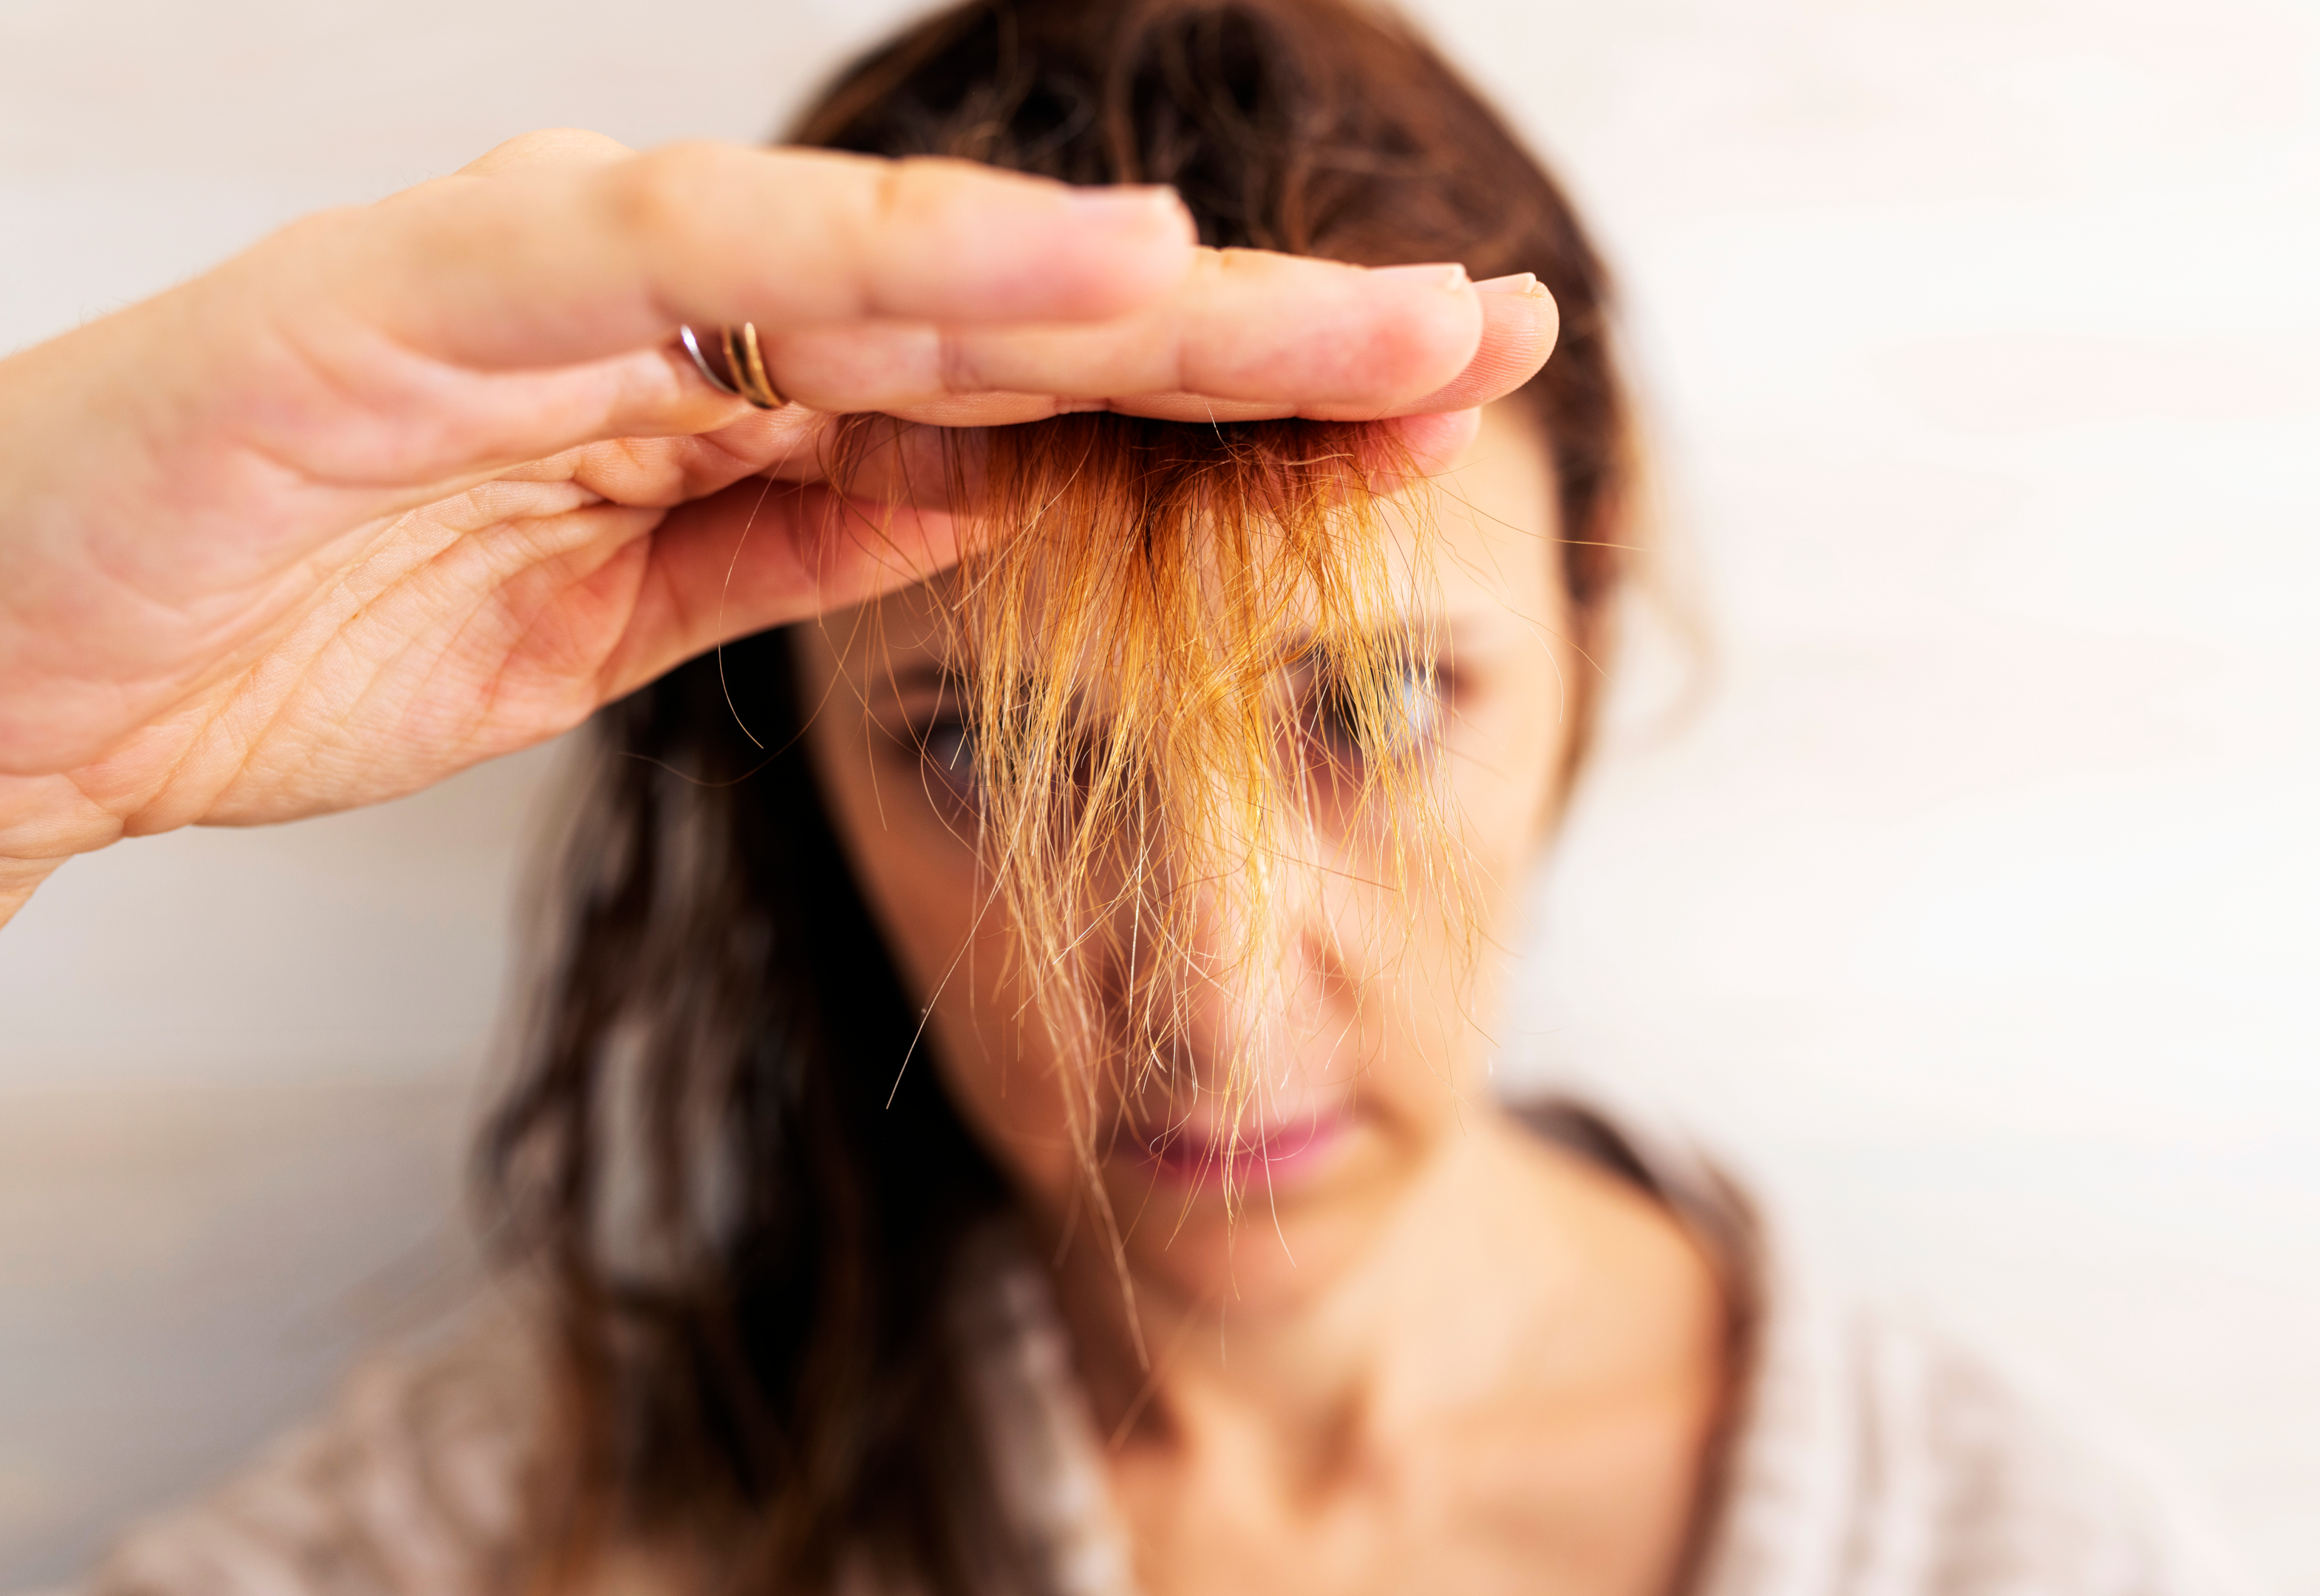 If you know how to fix split hair, you don't have to choose between length and health.